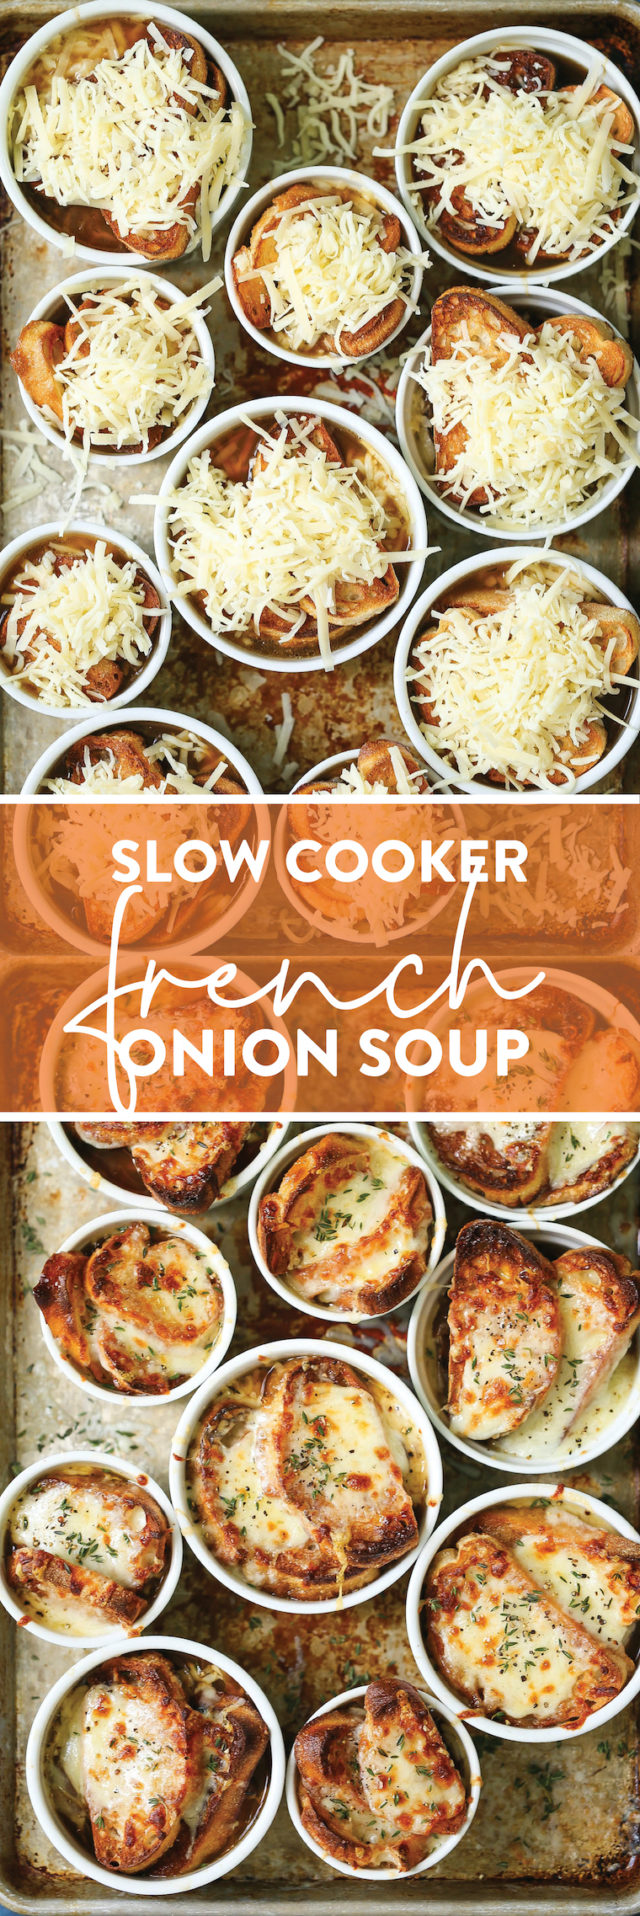 Slow Cooker French Onion Soup - Damn Delicious